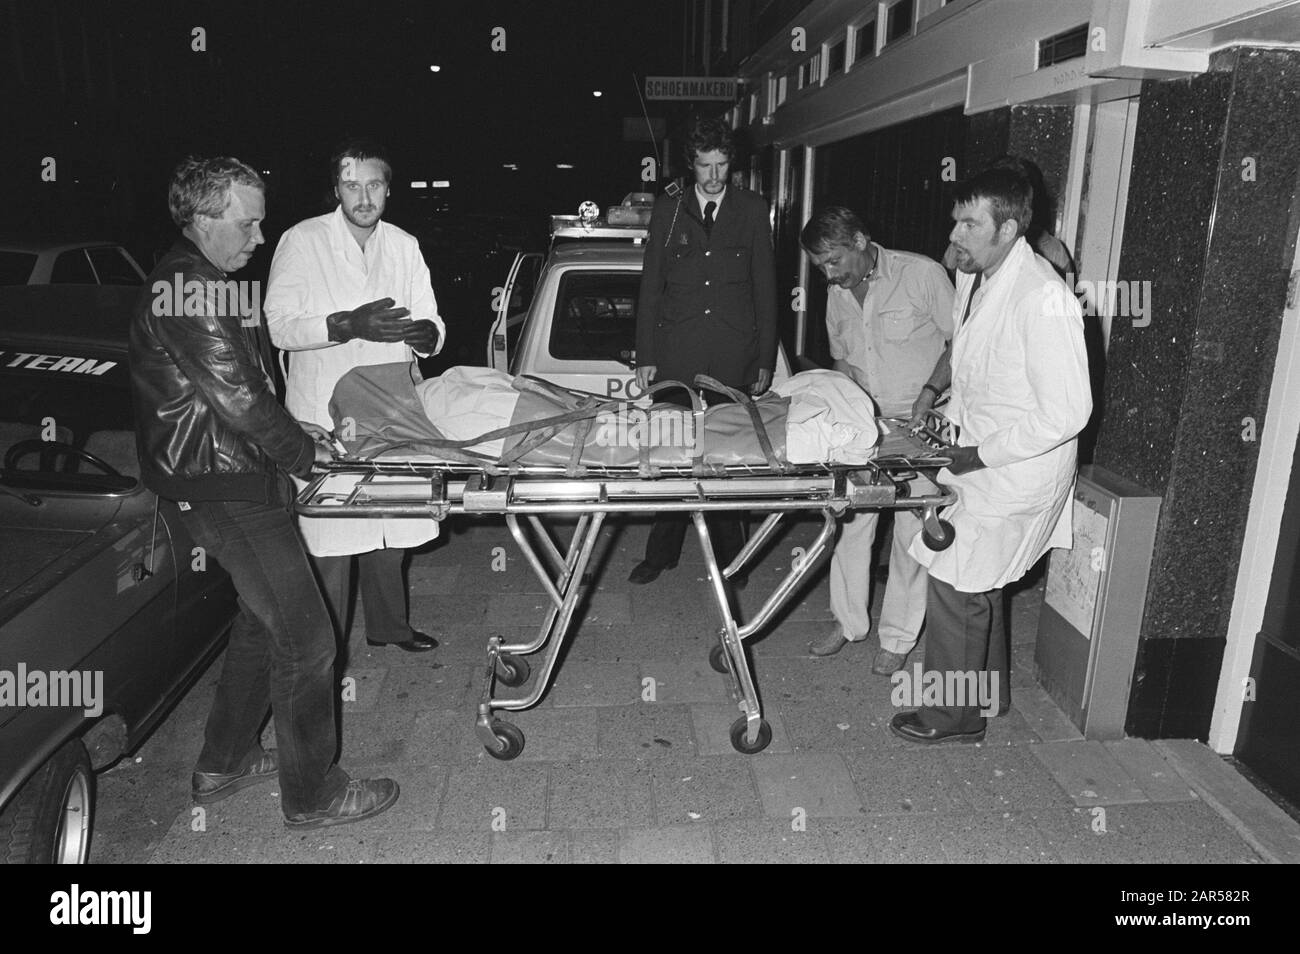 Last night a thirty year old man was murdered in the Amsterdam Lootstraat  The remains of the 30-year-old man murdered in the Amsterdam Lootstraat is carried away by ambulance staff Date: 31 August 1981 Location: Amsterdam, Noord-Holland Keywords: ambulances, emergency services, corpses, murders Stock Photo